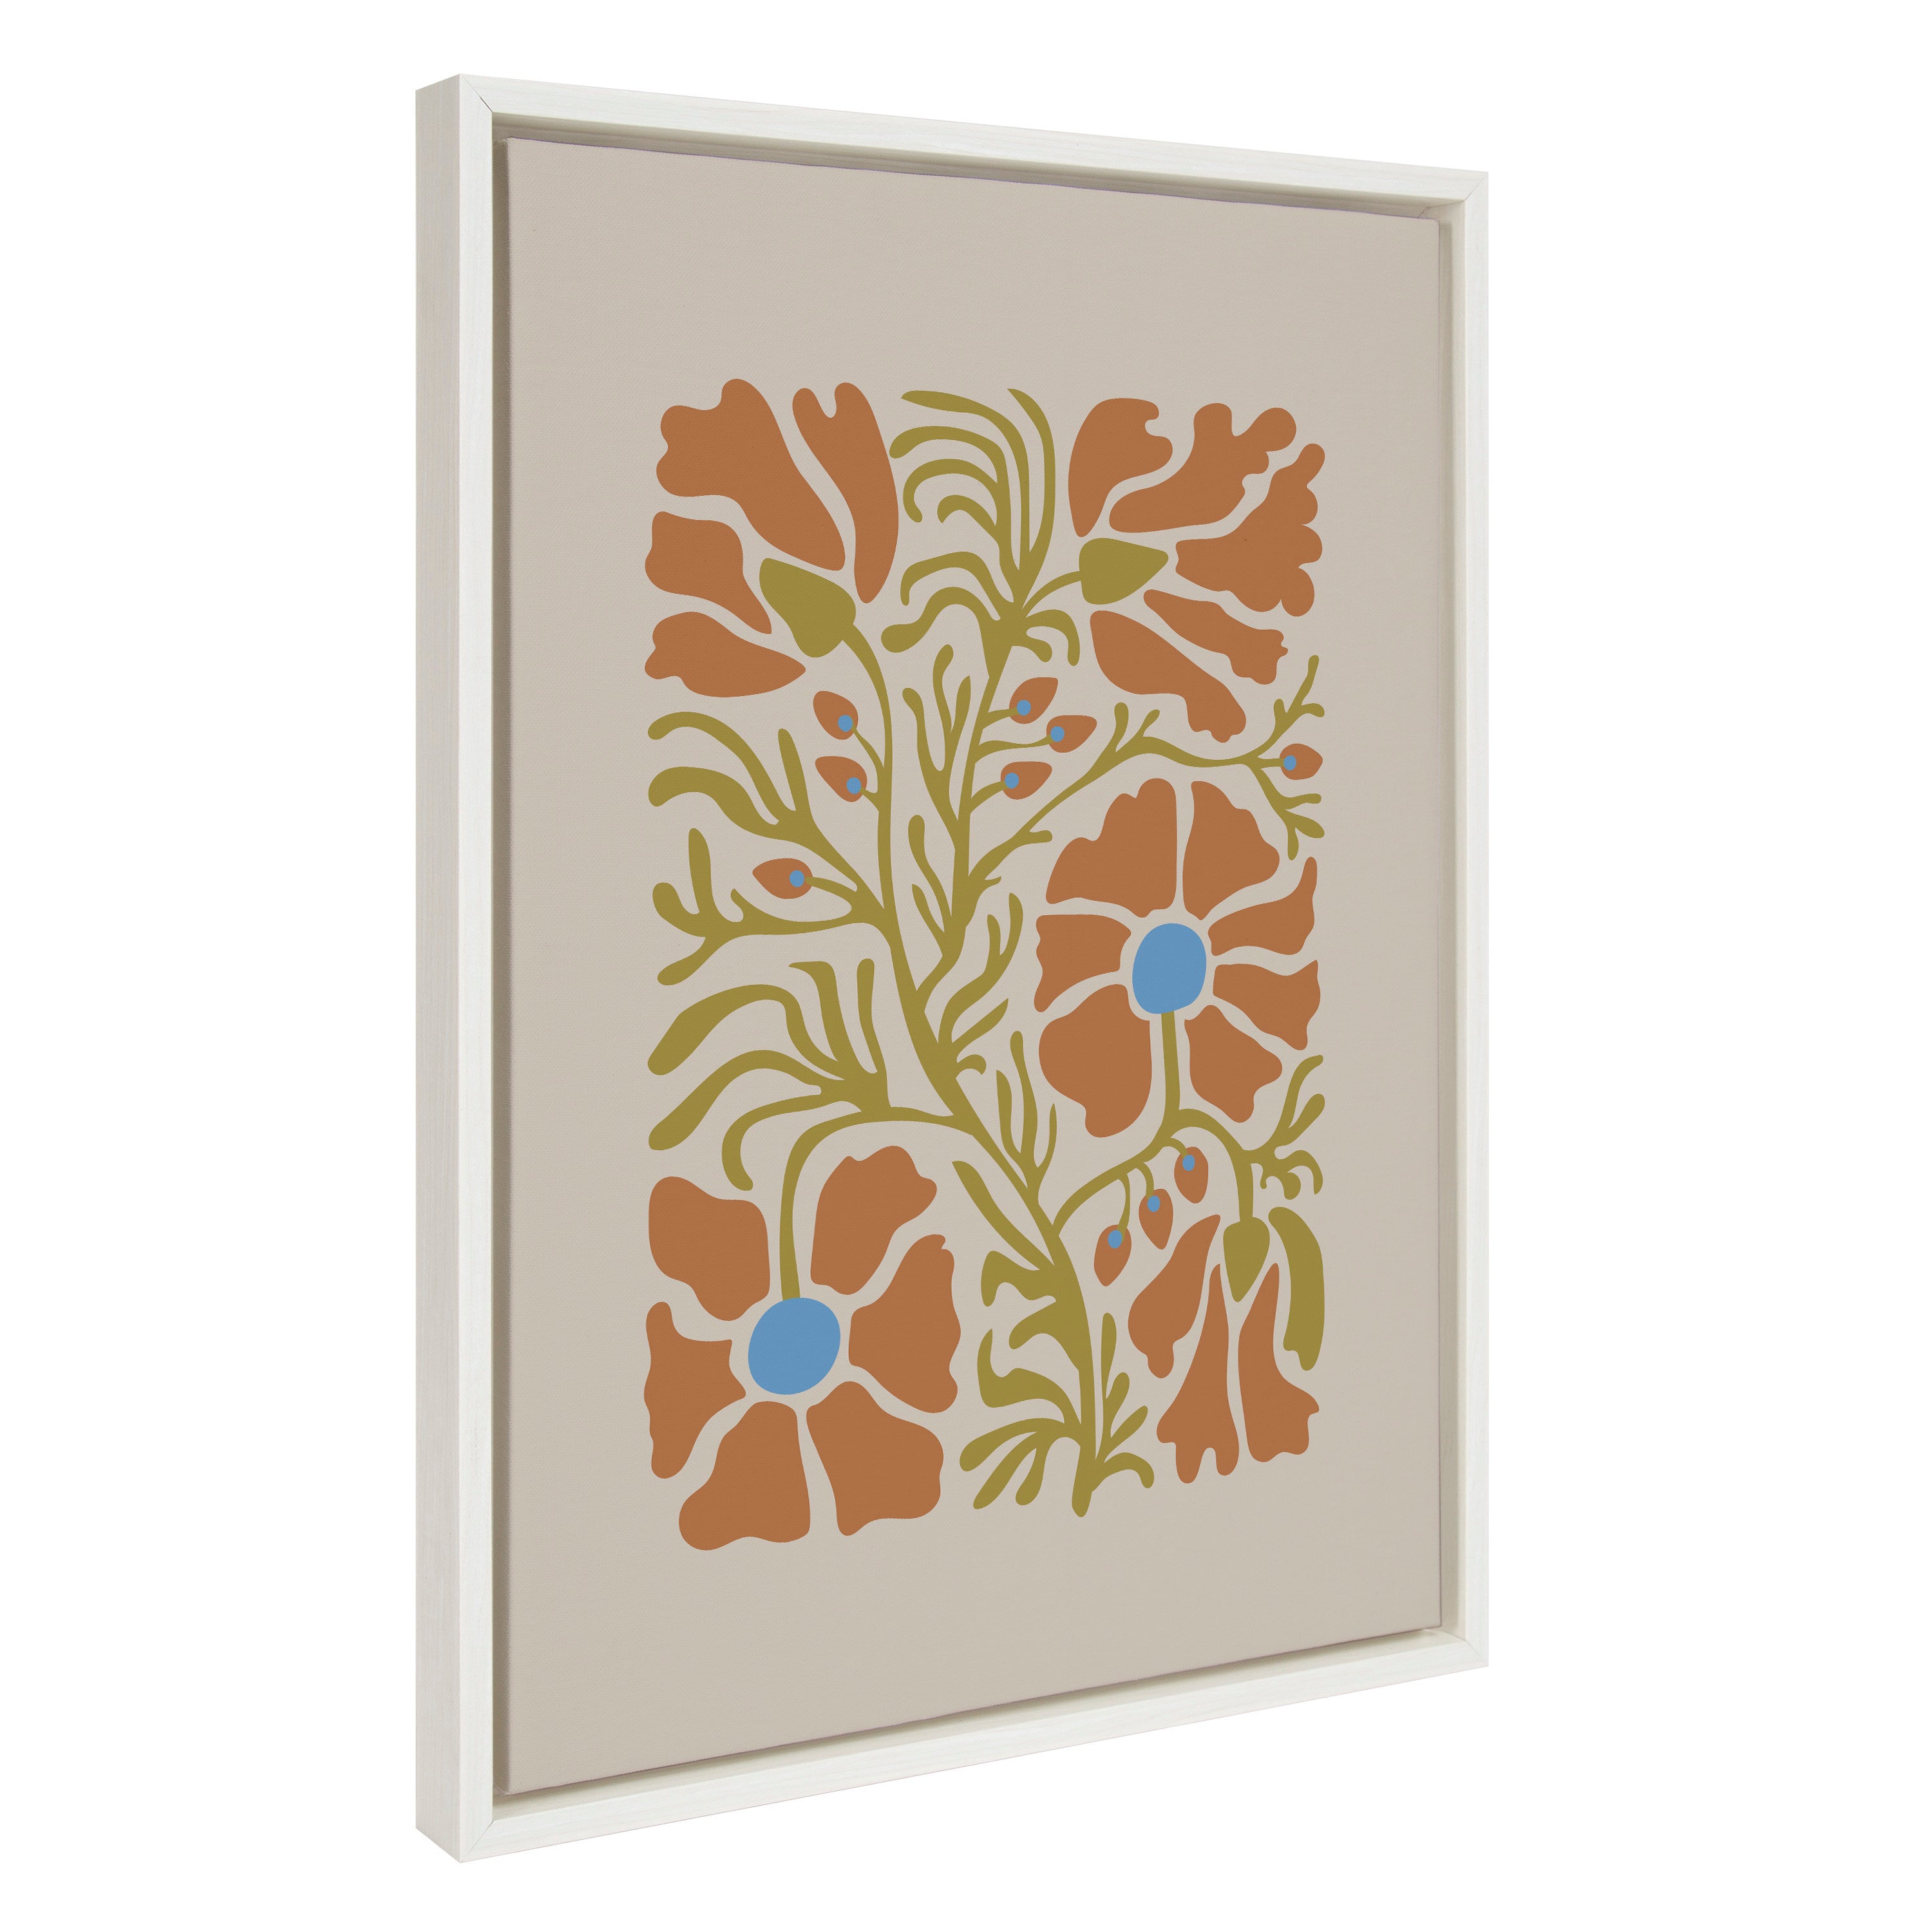 Sylvie Colorful Abstract Retro Floral Orange Framed Canvas by The Creative Bunch Studio